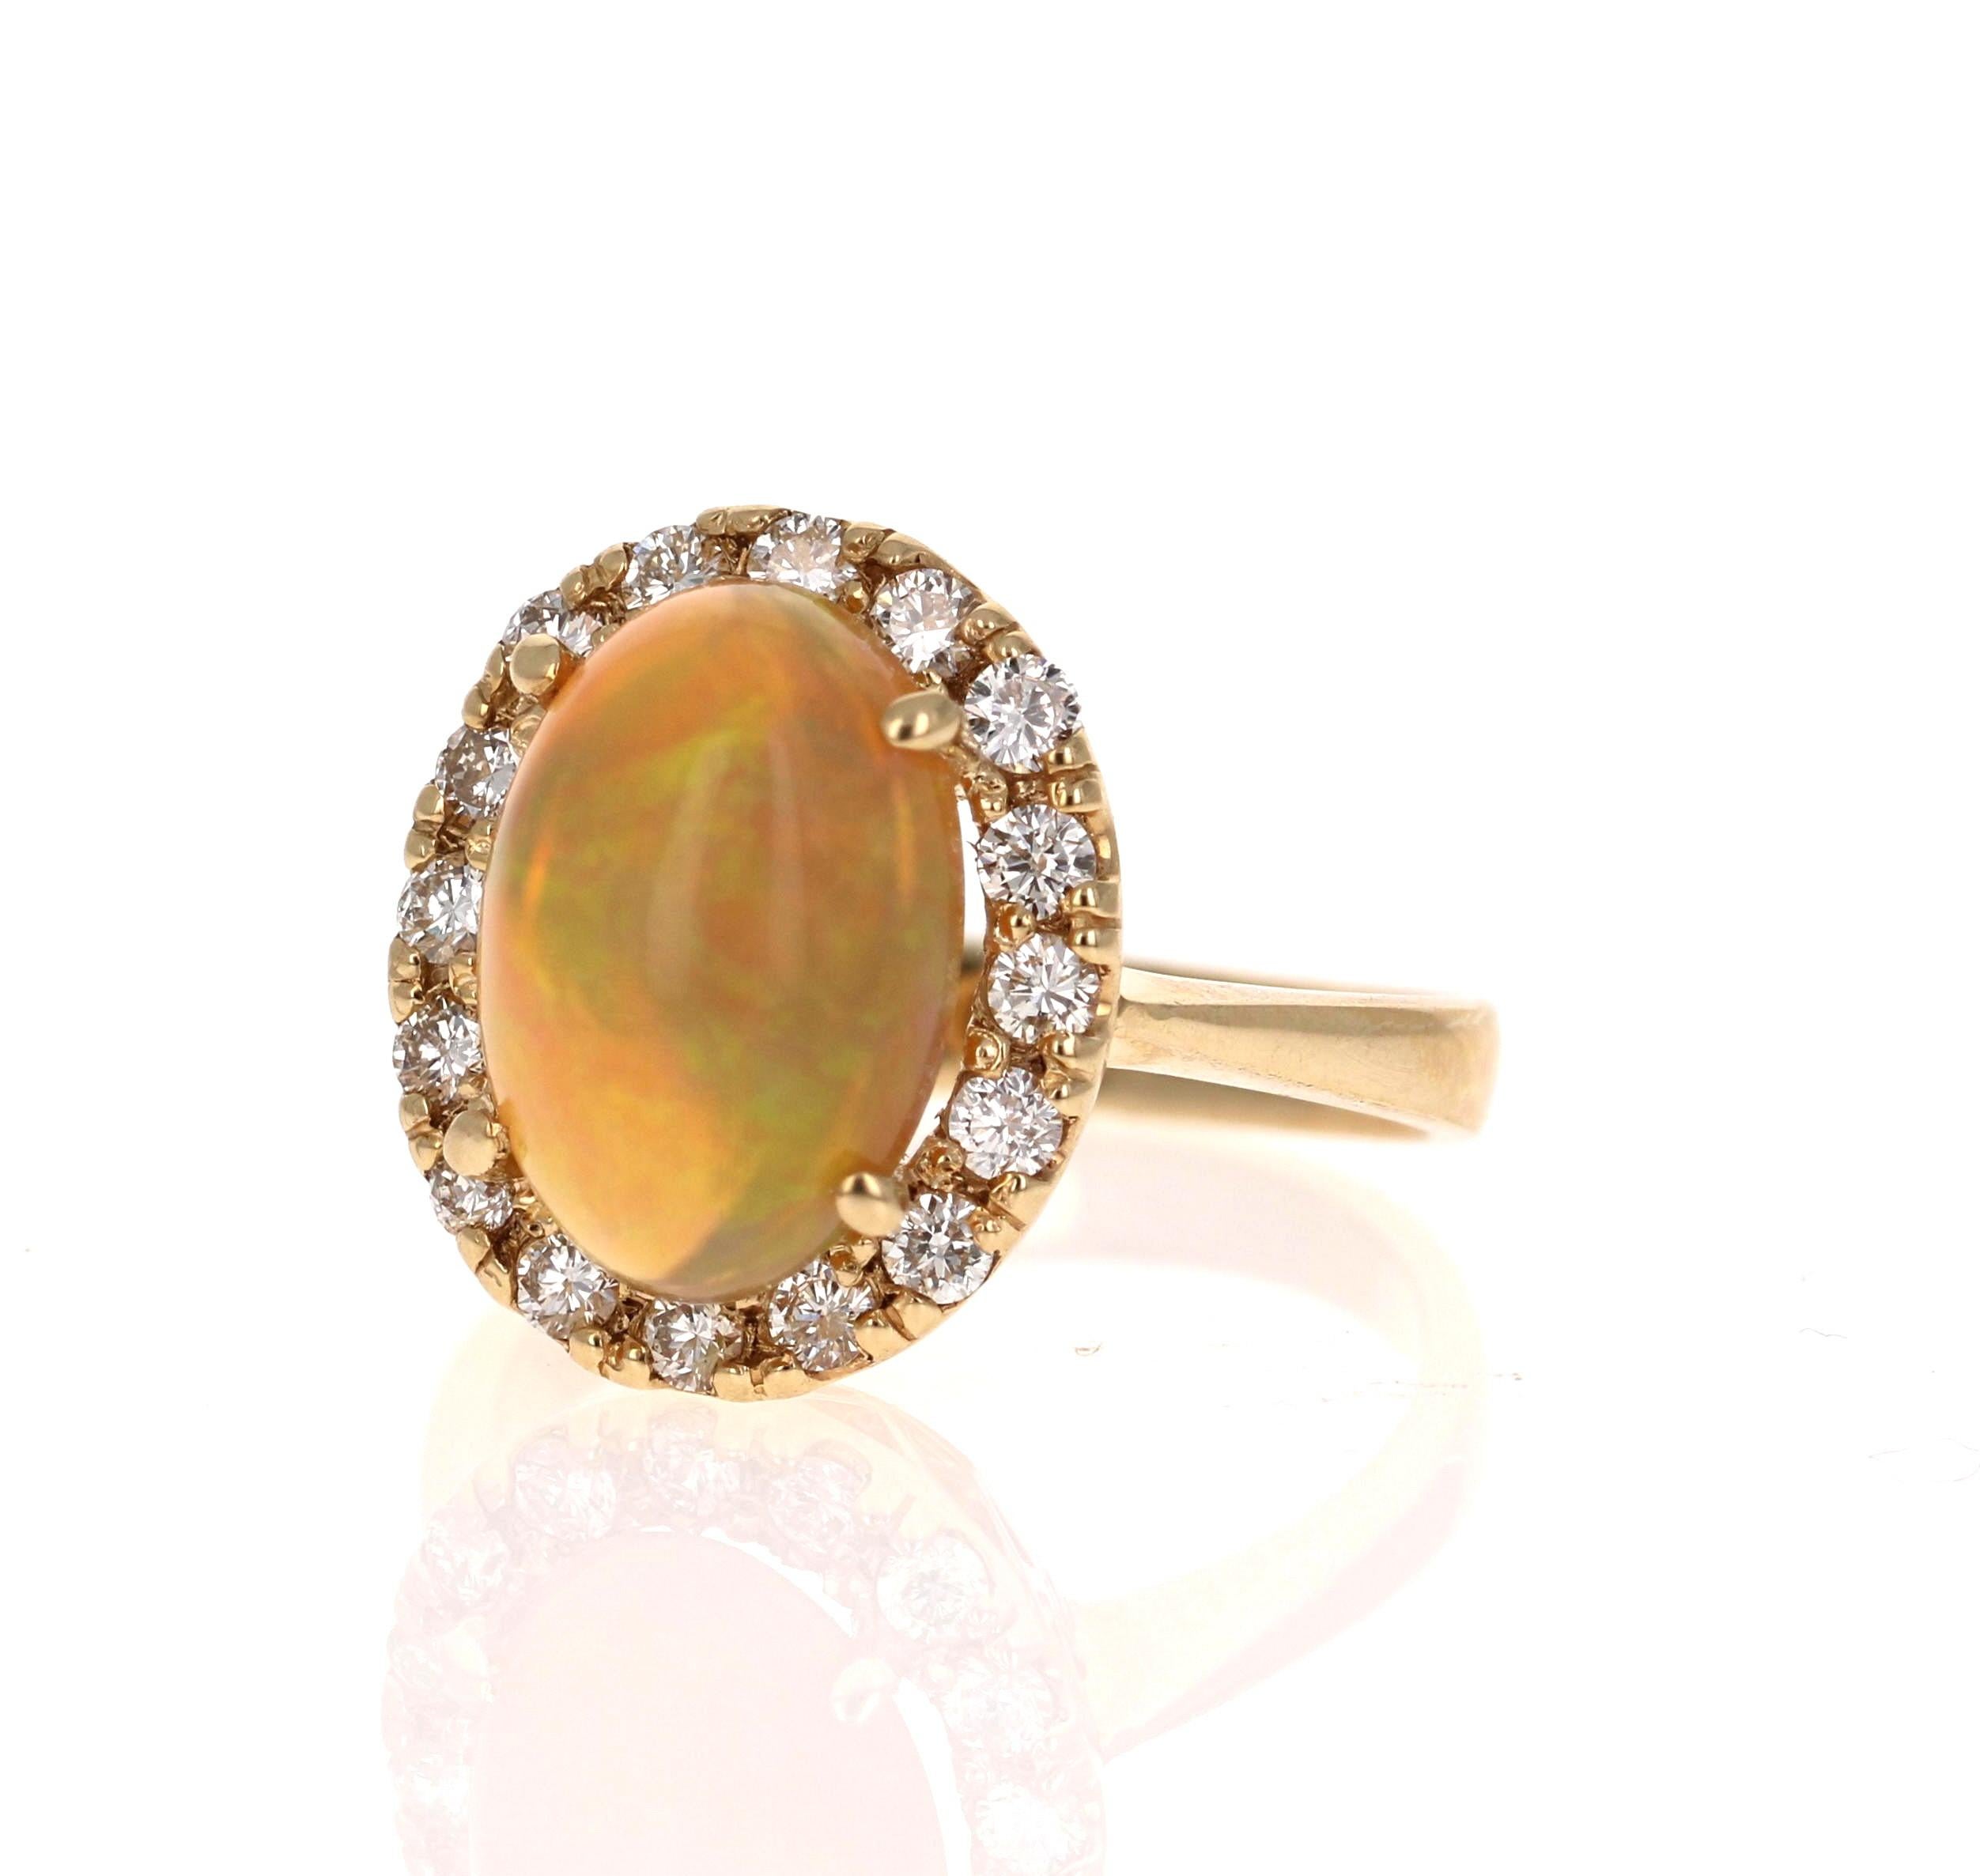 This ring has a cute and simple 2.88 Carat Opal and has a Halo of 16 Round Cut Diamonds that weigh 0.55 Carats (Clarity: VS2, Color: H). The total carat weight of the ring is 3.43 Carats. 

The Opal displays beautiful flashes of green, yellow, and